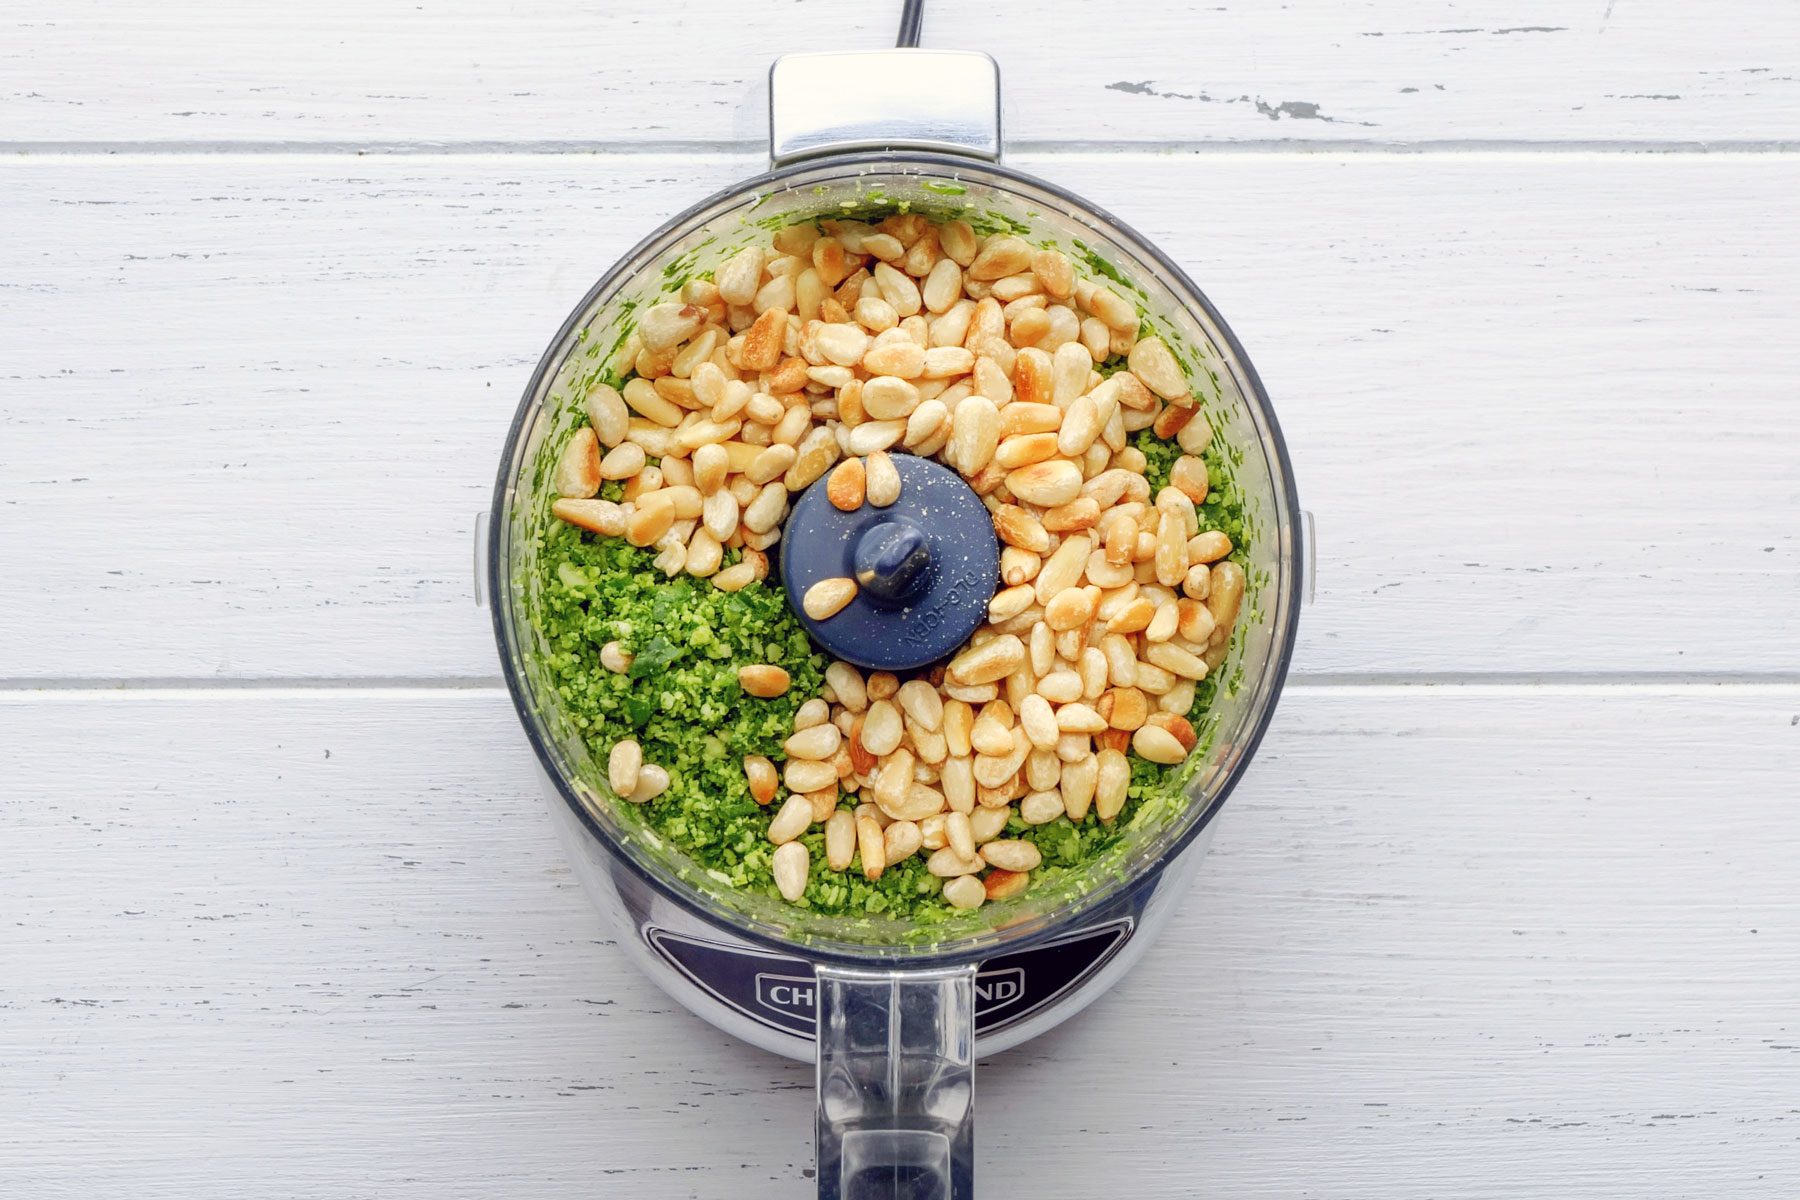 Pine nuts mixed with basil leaves mixture in a blender